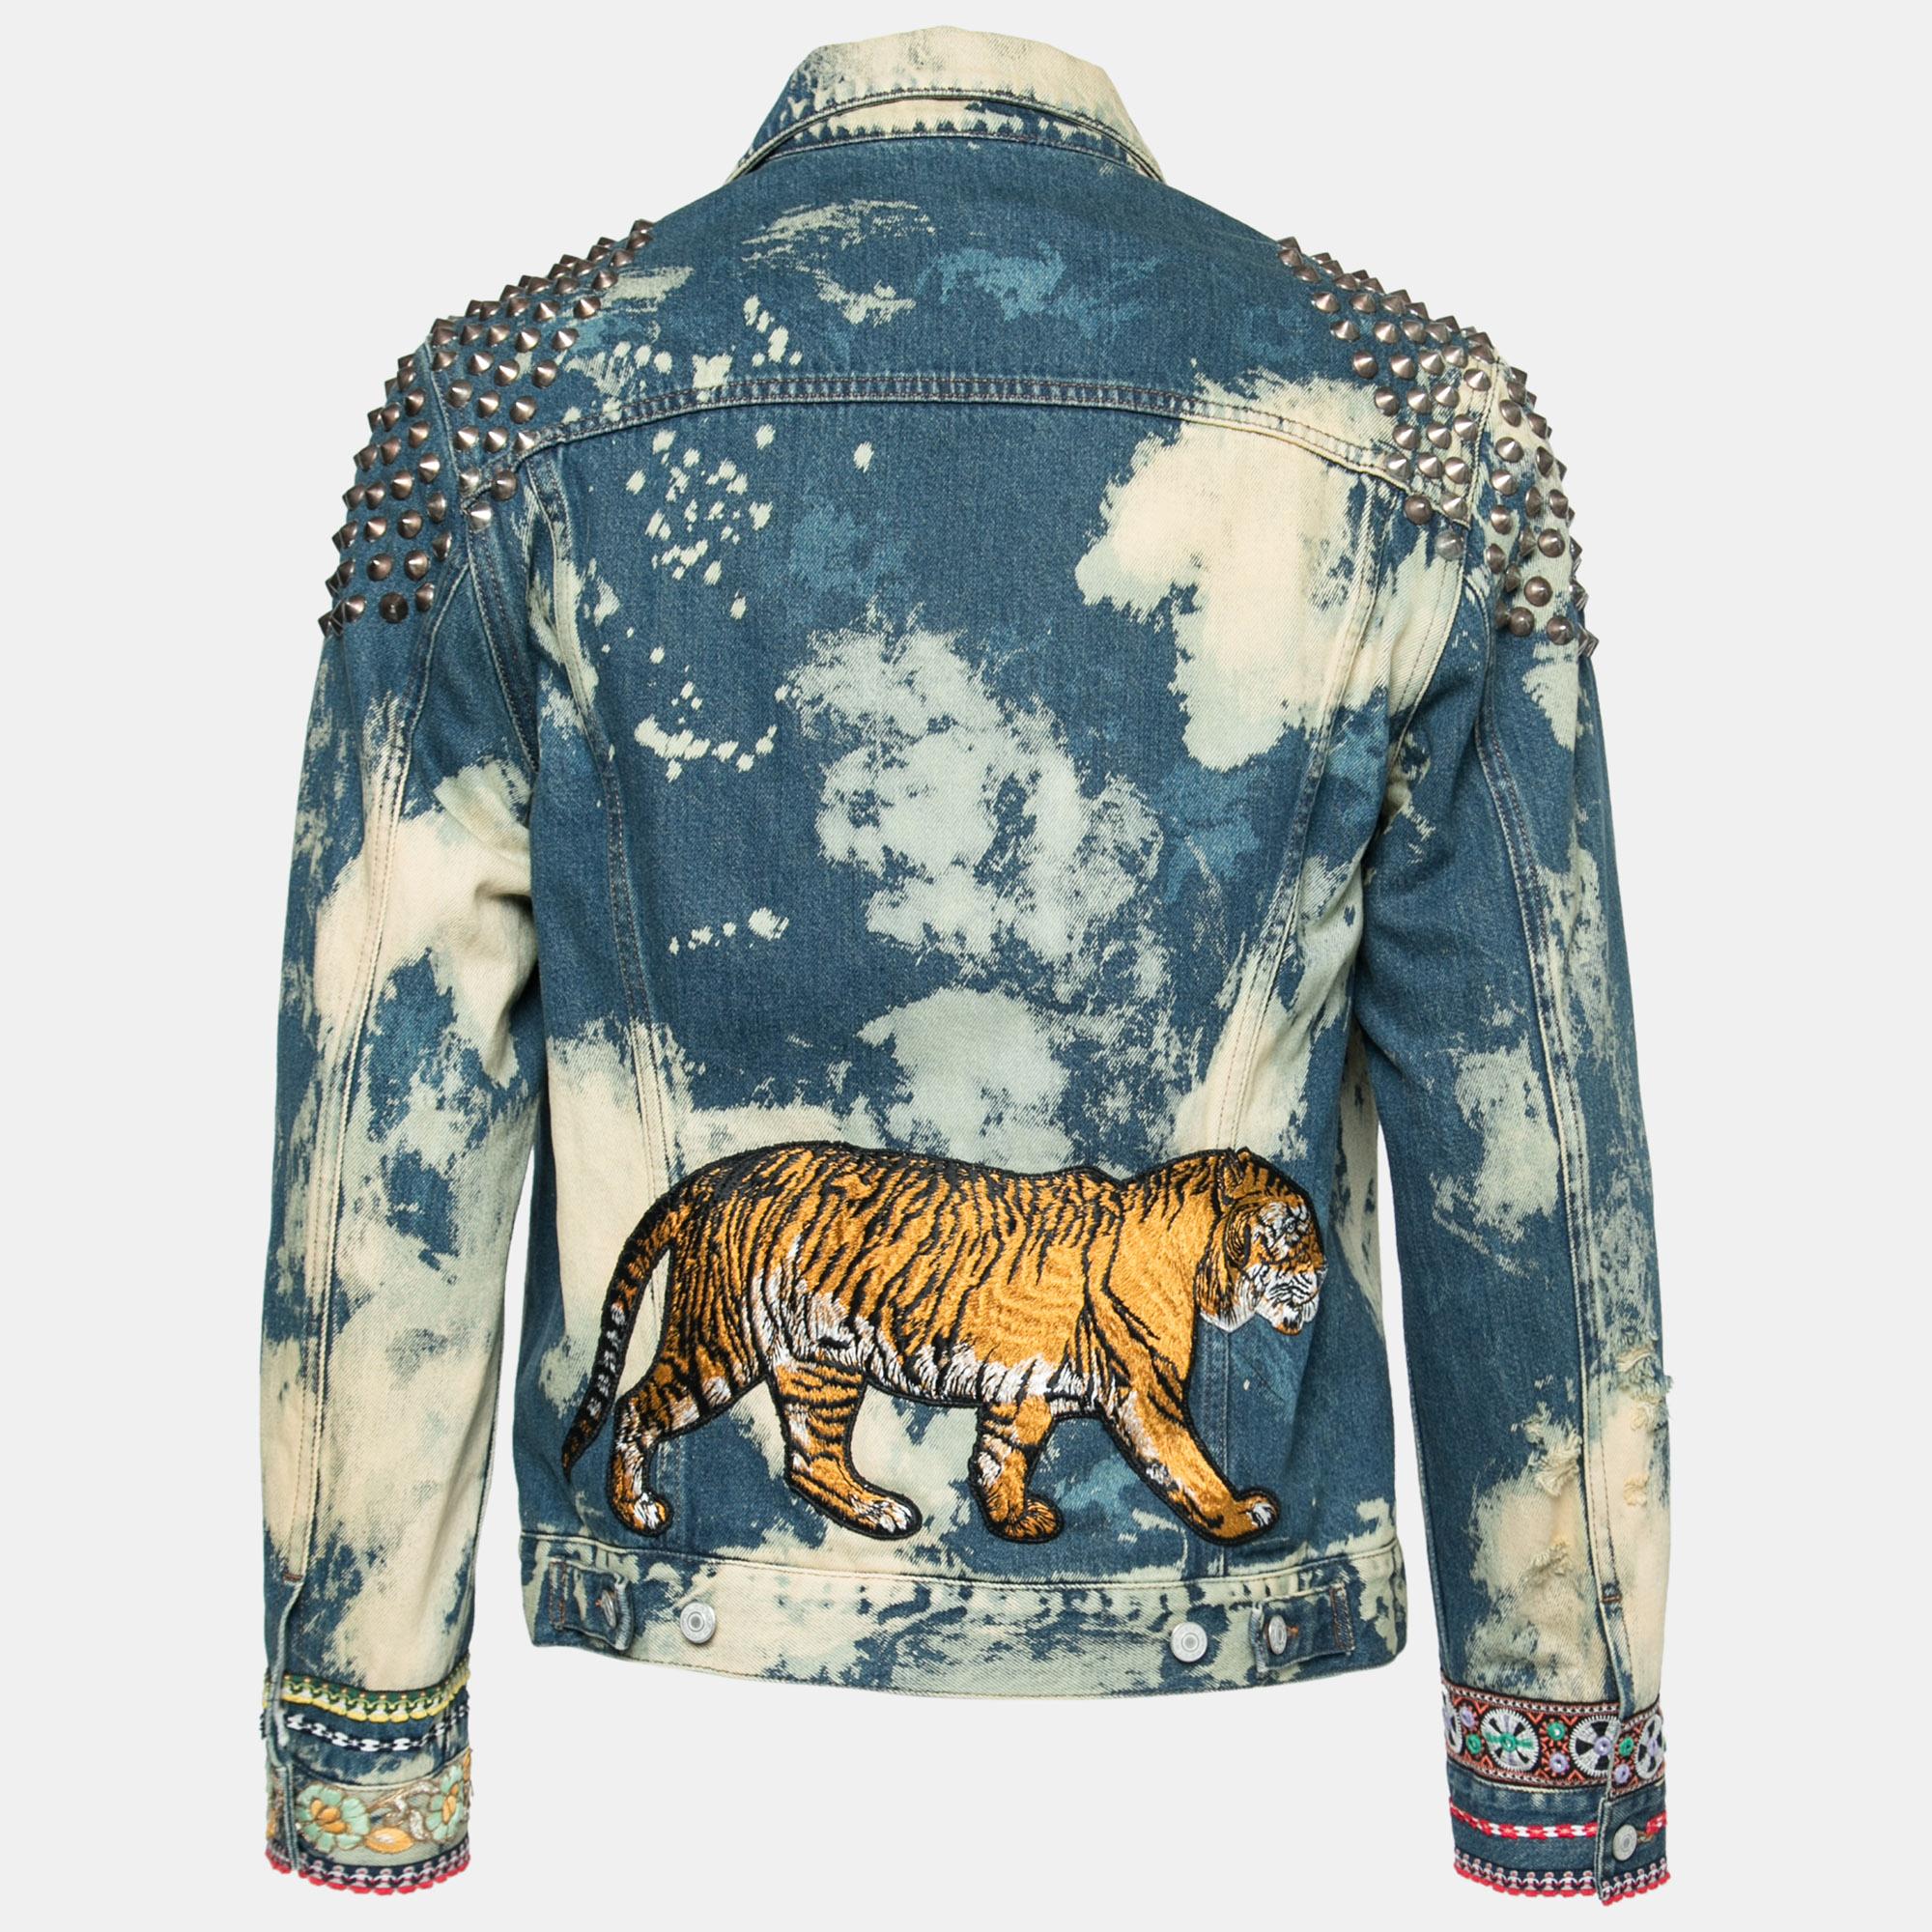 Add this Gucci jacket to your wardrobe for a stylish upgrade. It flaunts a blue, washed denim exterior with studs and an eye-catching tiger design on the back. Complete with front buttons and pockets, this exquisite jacket is nothing short of a